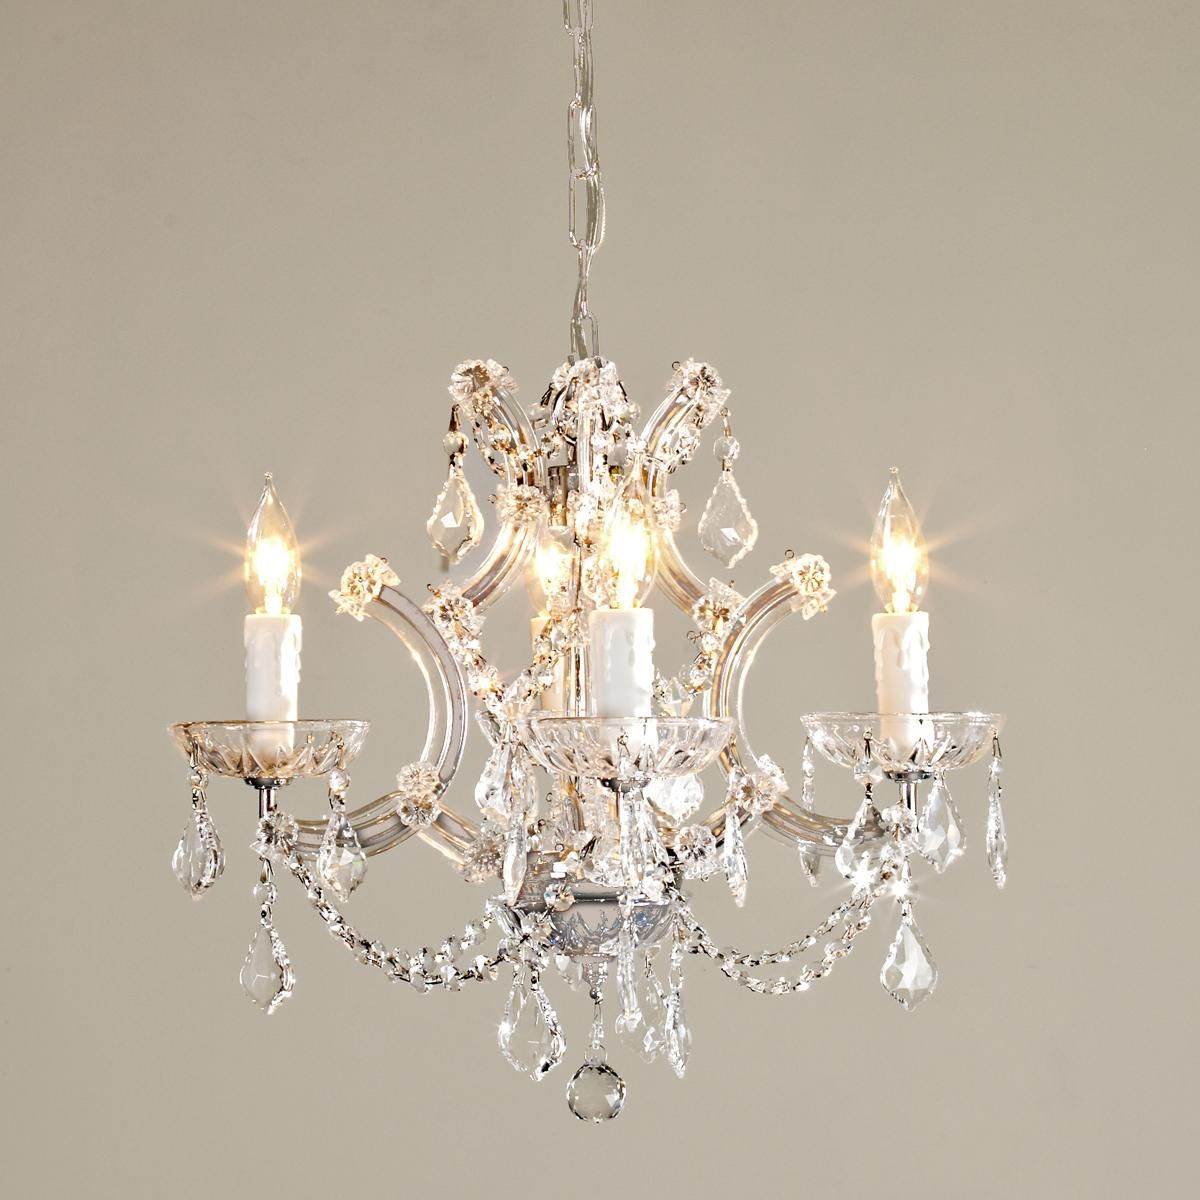 Small Chandelier For Bedroom
 Round Crystal Chandelier